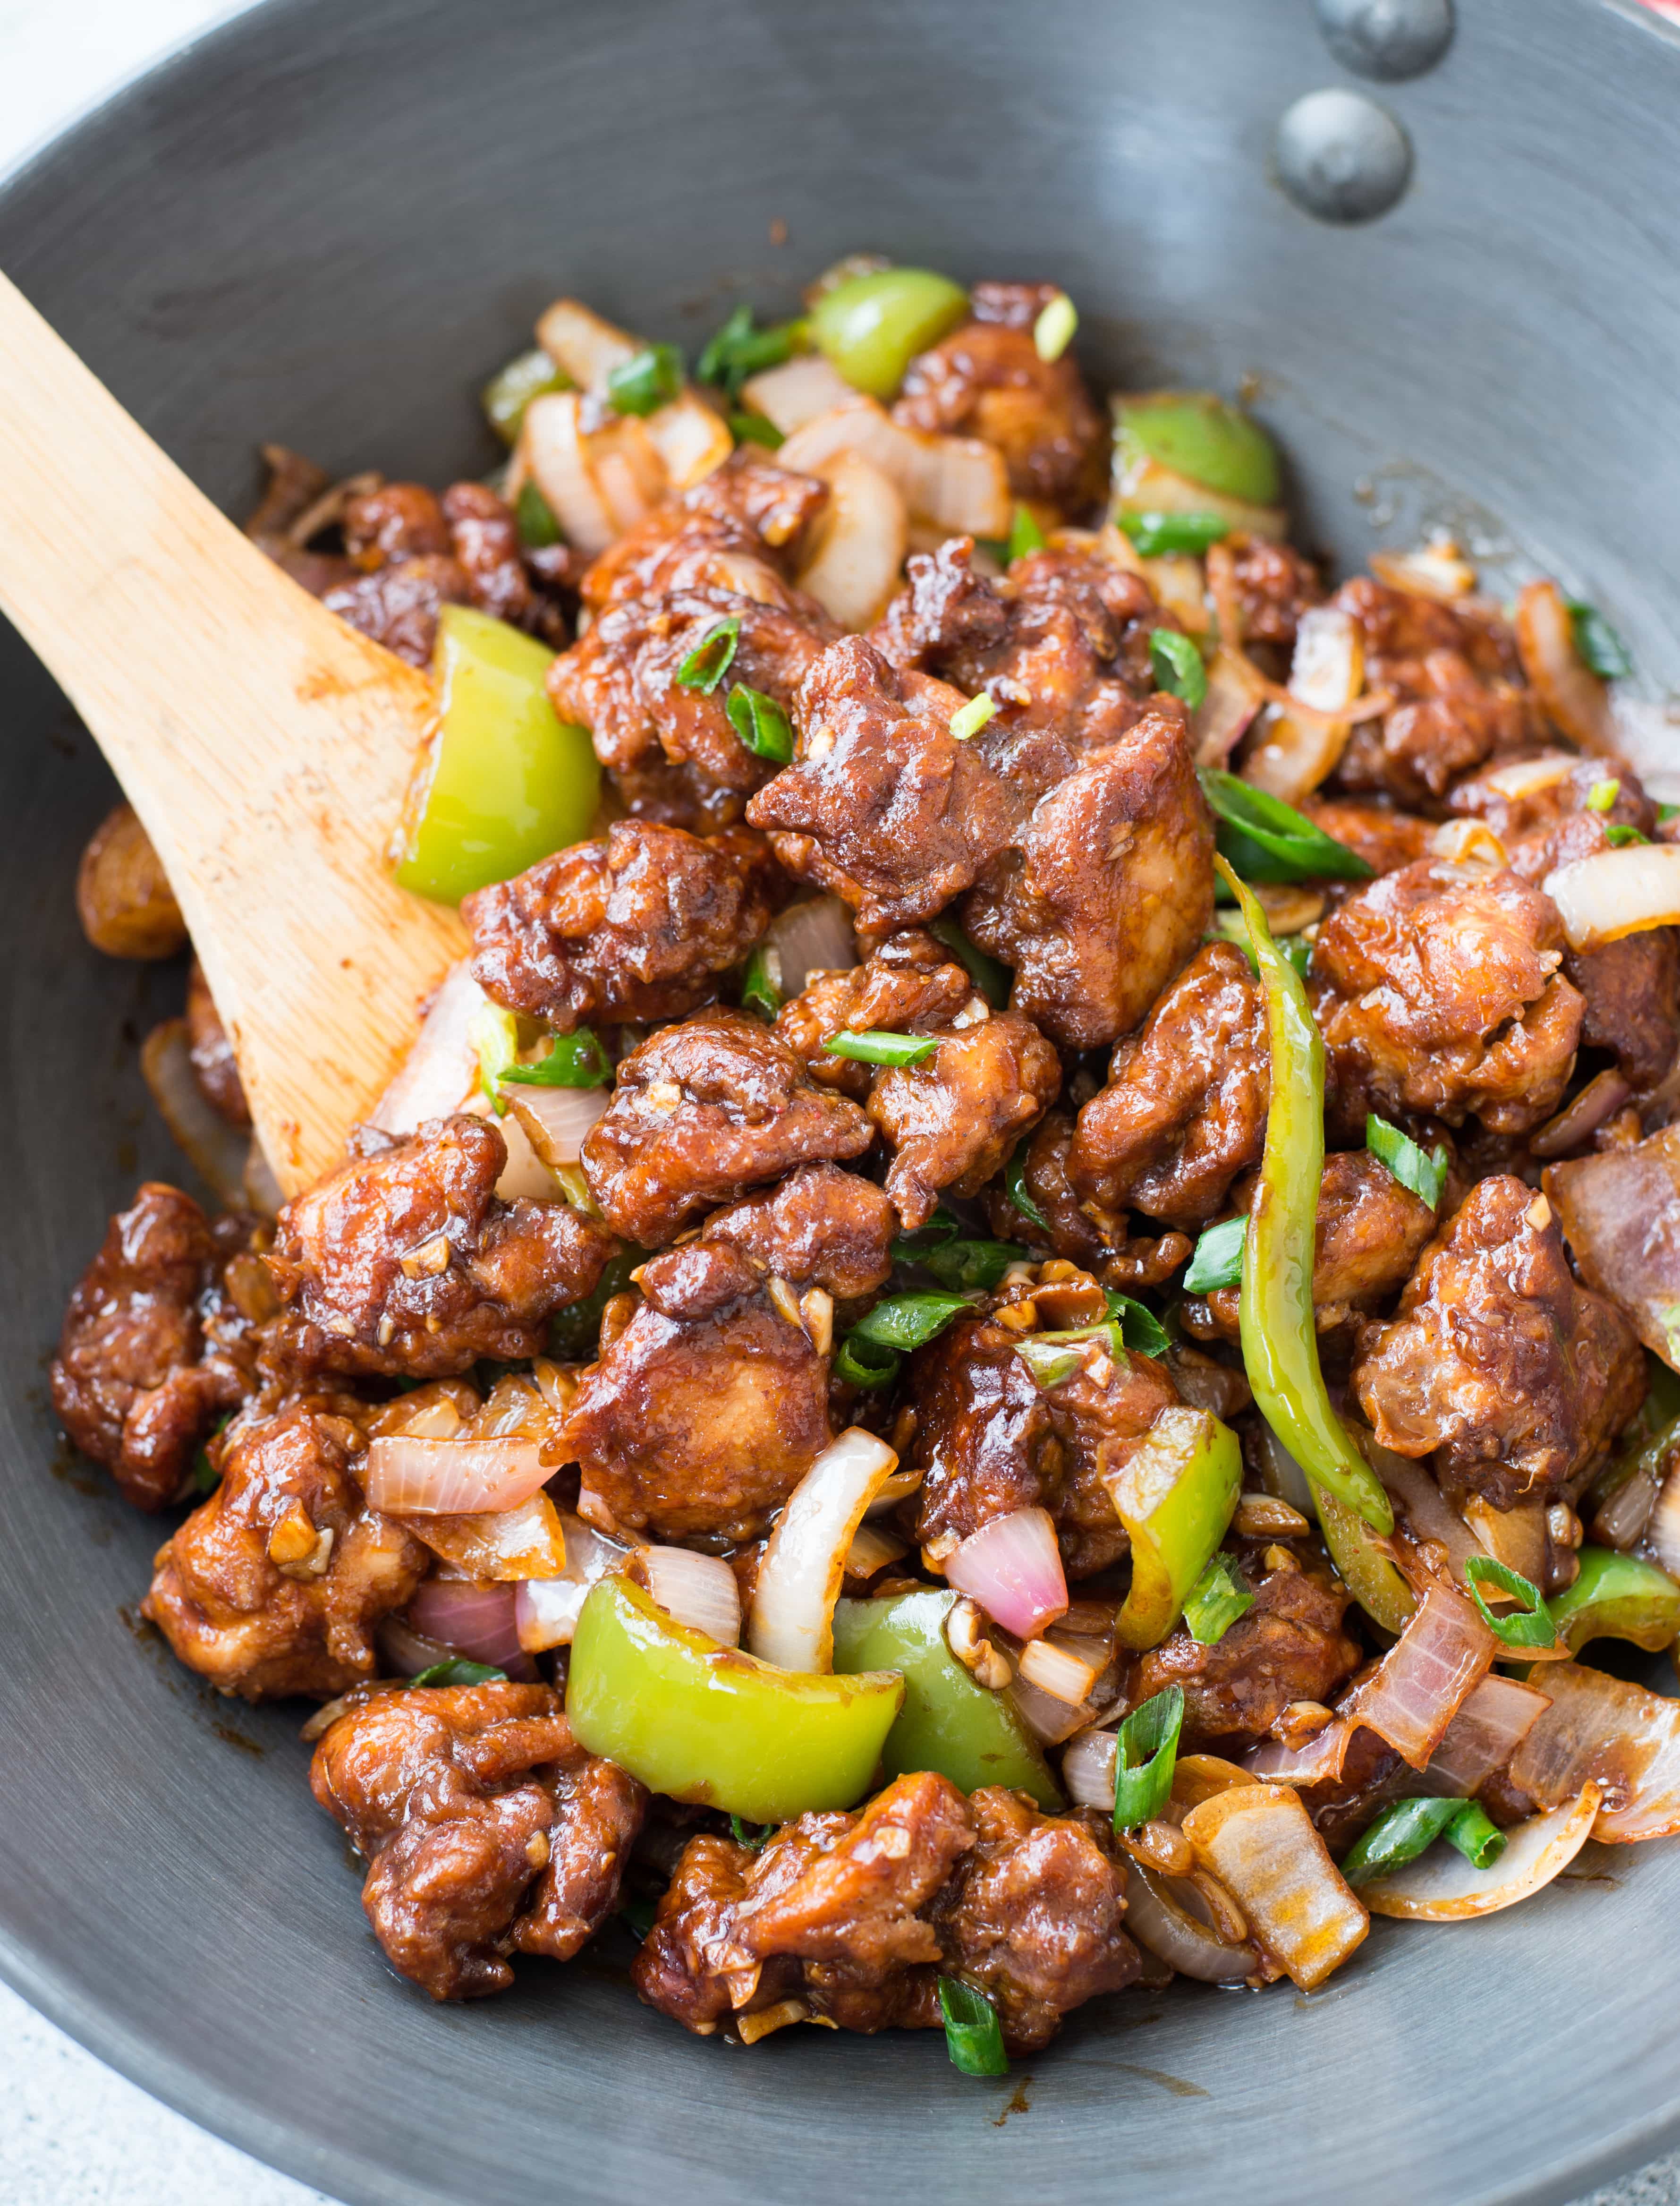  Learn how to make restaurant style Indo Chinese Chili Chicken Dry and Gravy at home with a detailed video. Crispy fried chicken tossed in garlic, onion, capsicum and a spicy Chinese style Sauce.